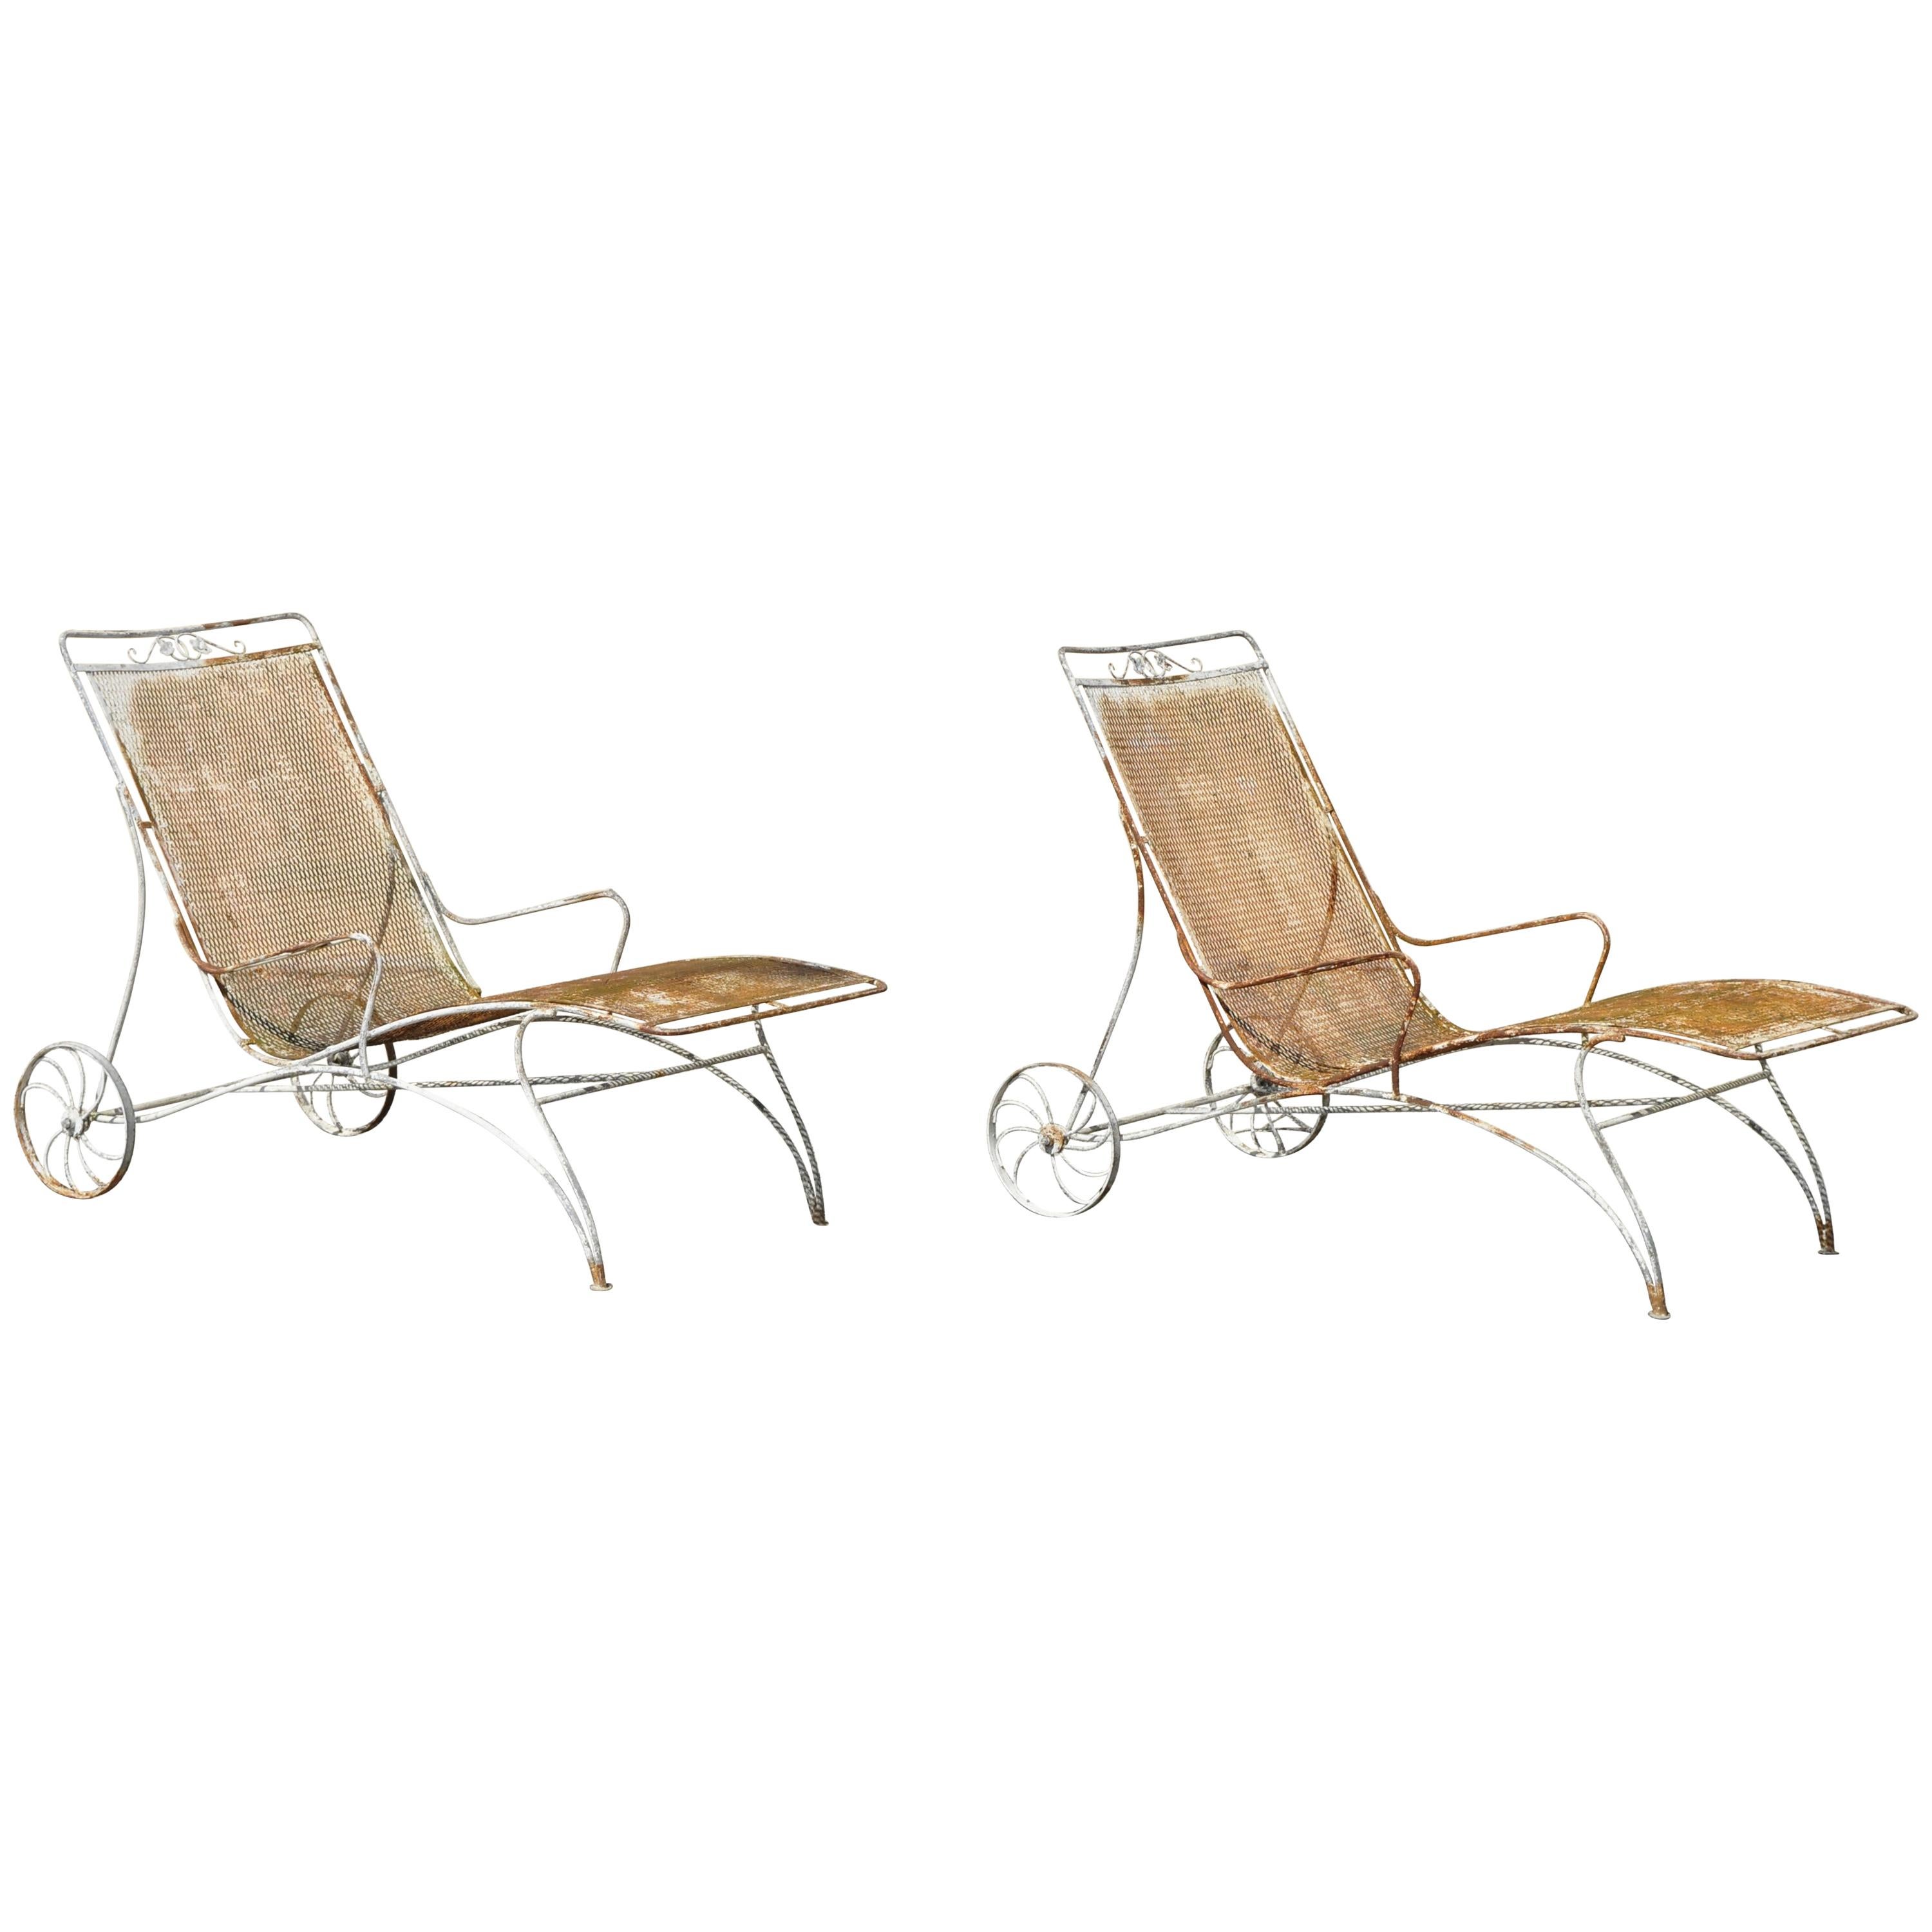 Mid-Century Modern Russell Woodard Wrought Iron Patio Chaise Lounge Chair, Pair